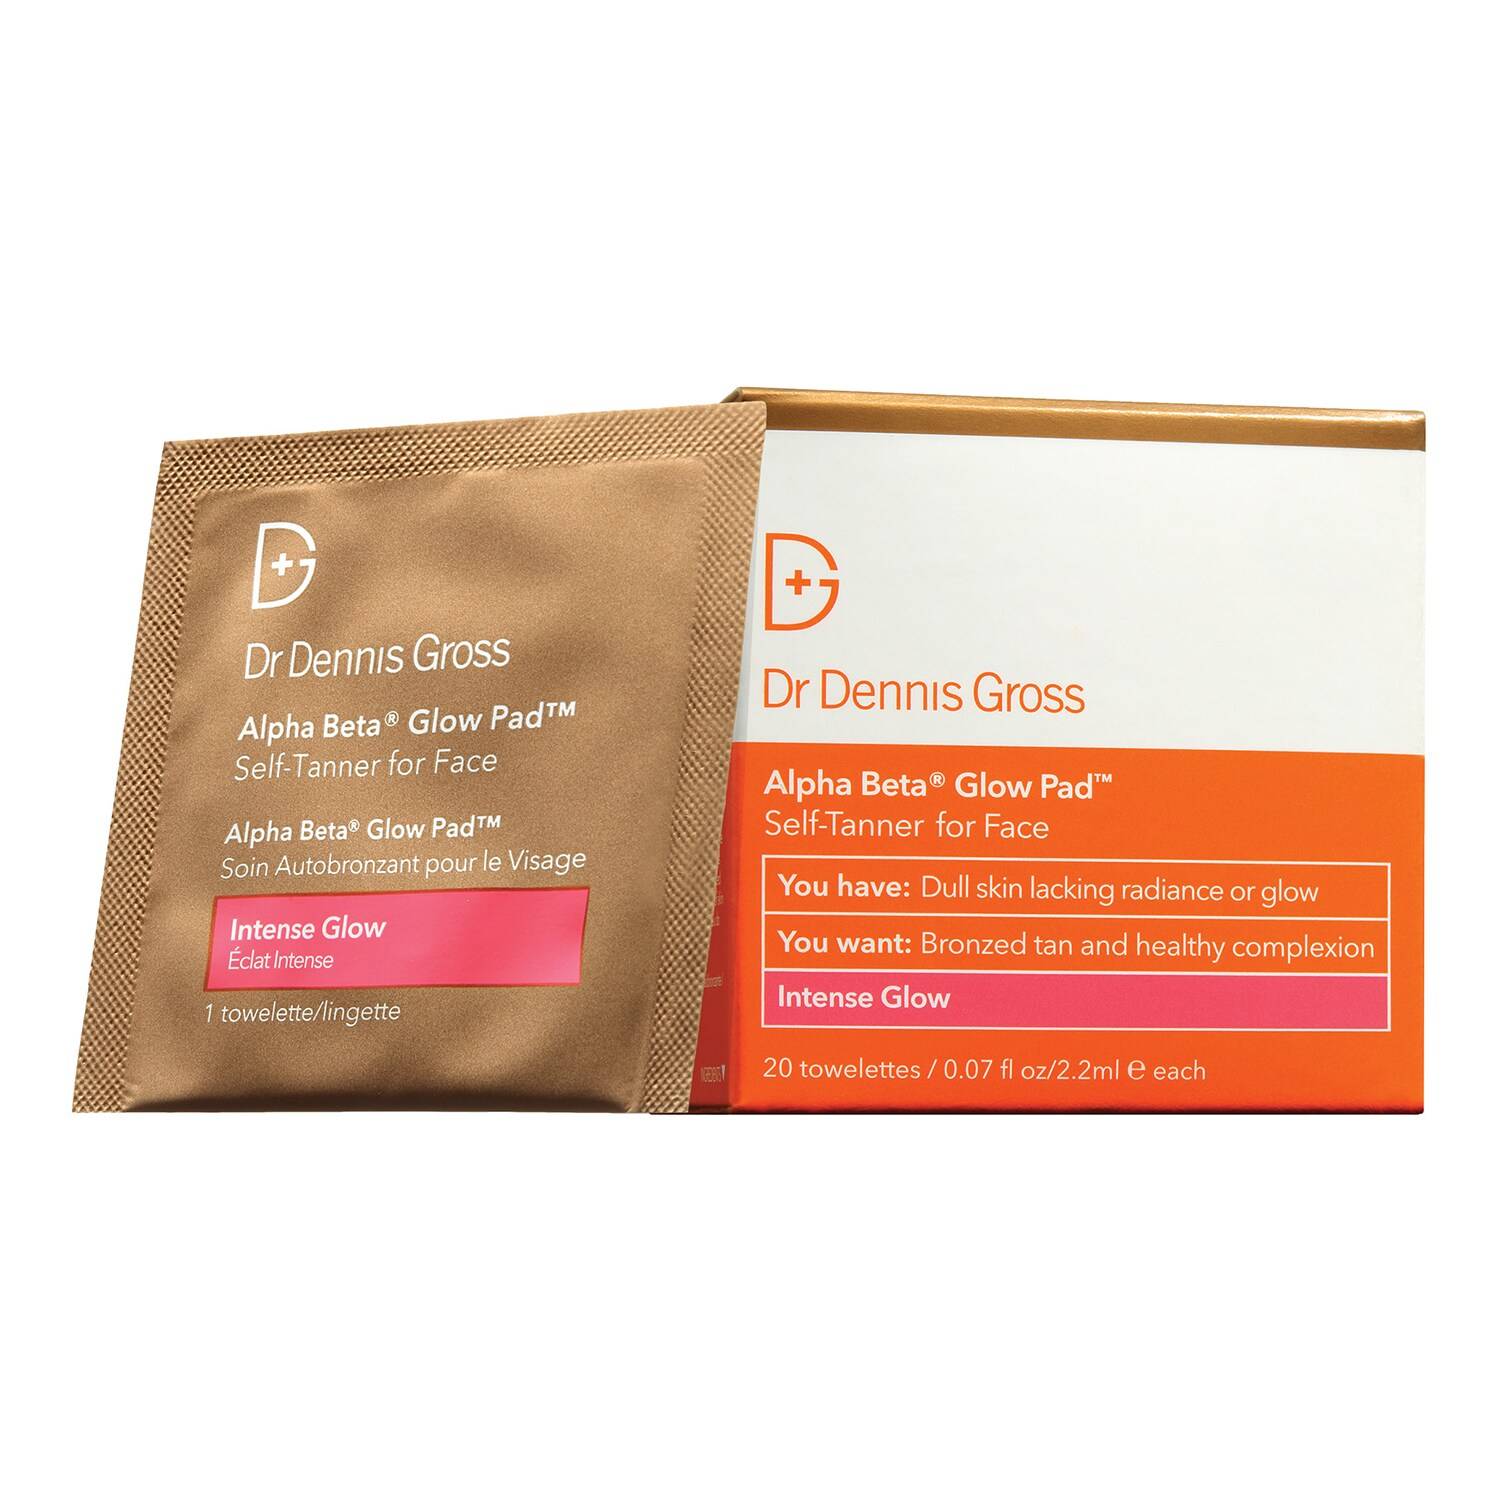 Dr Dennis Gross Alpha Beta Glow Pad Self Tanner For Face Intense Glow 20 Applications